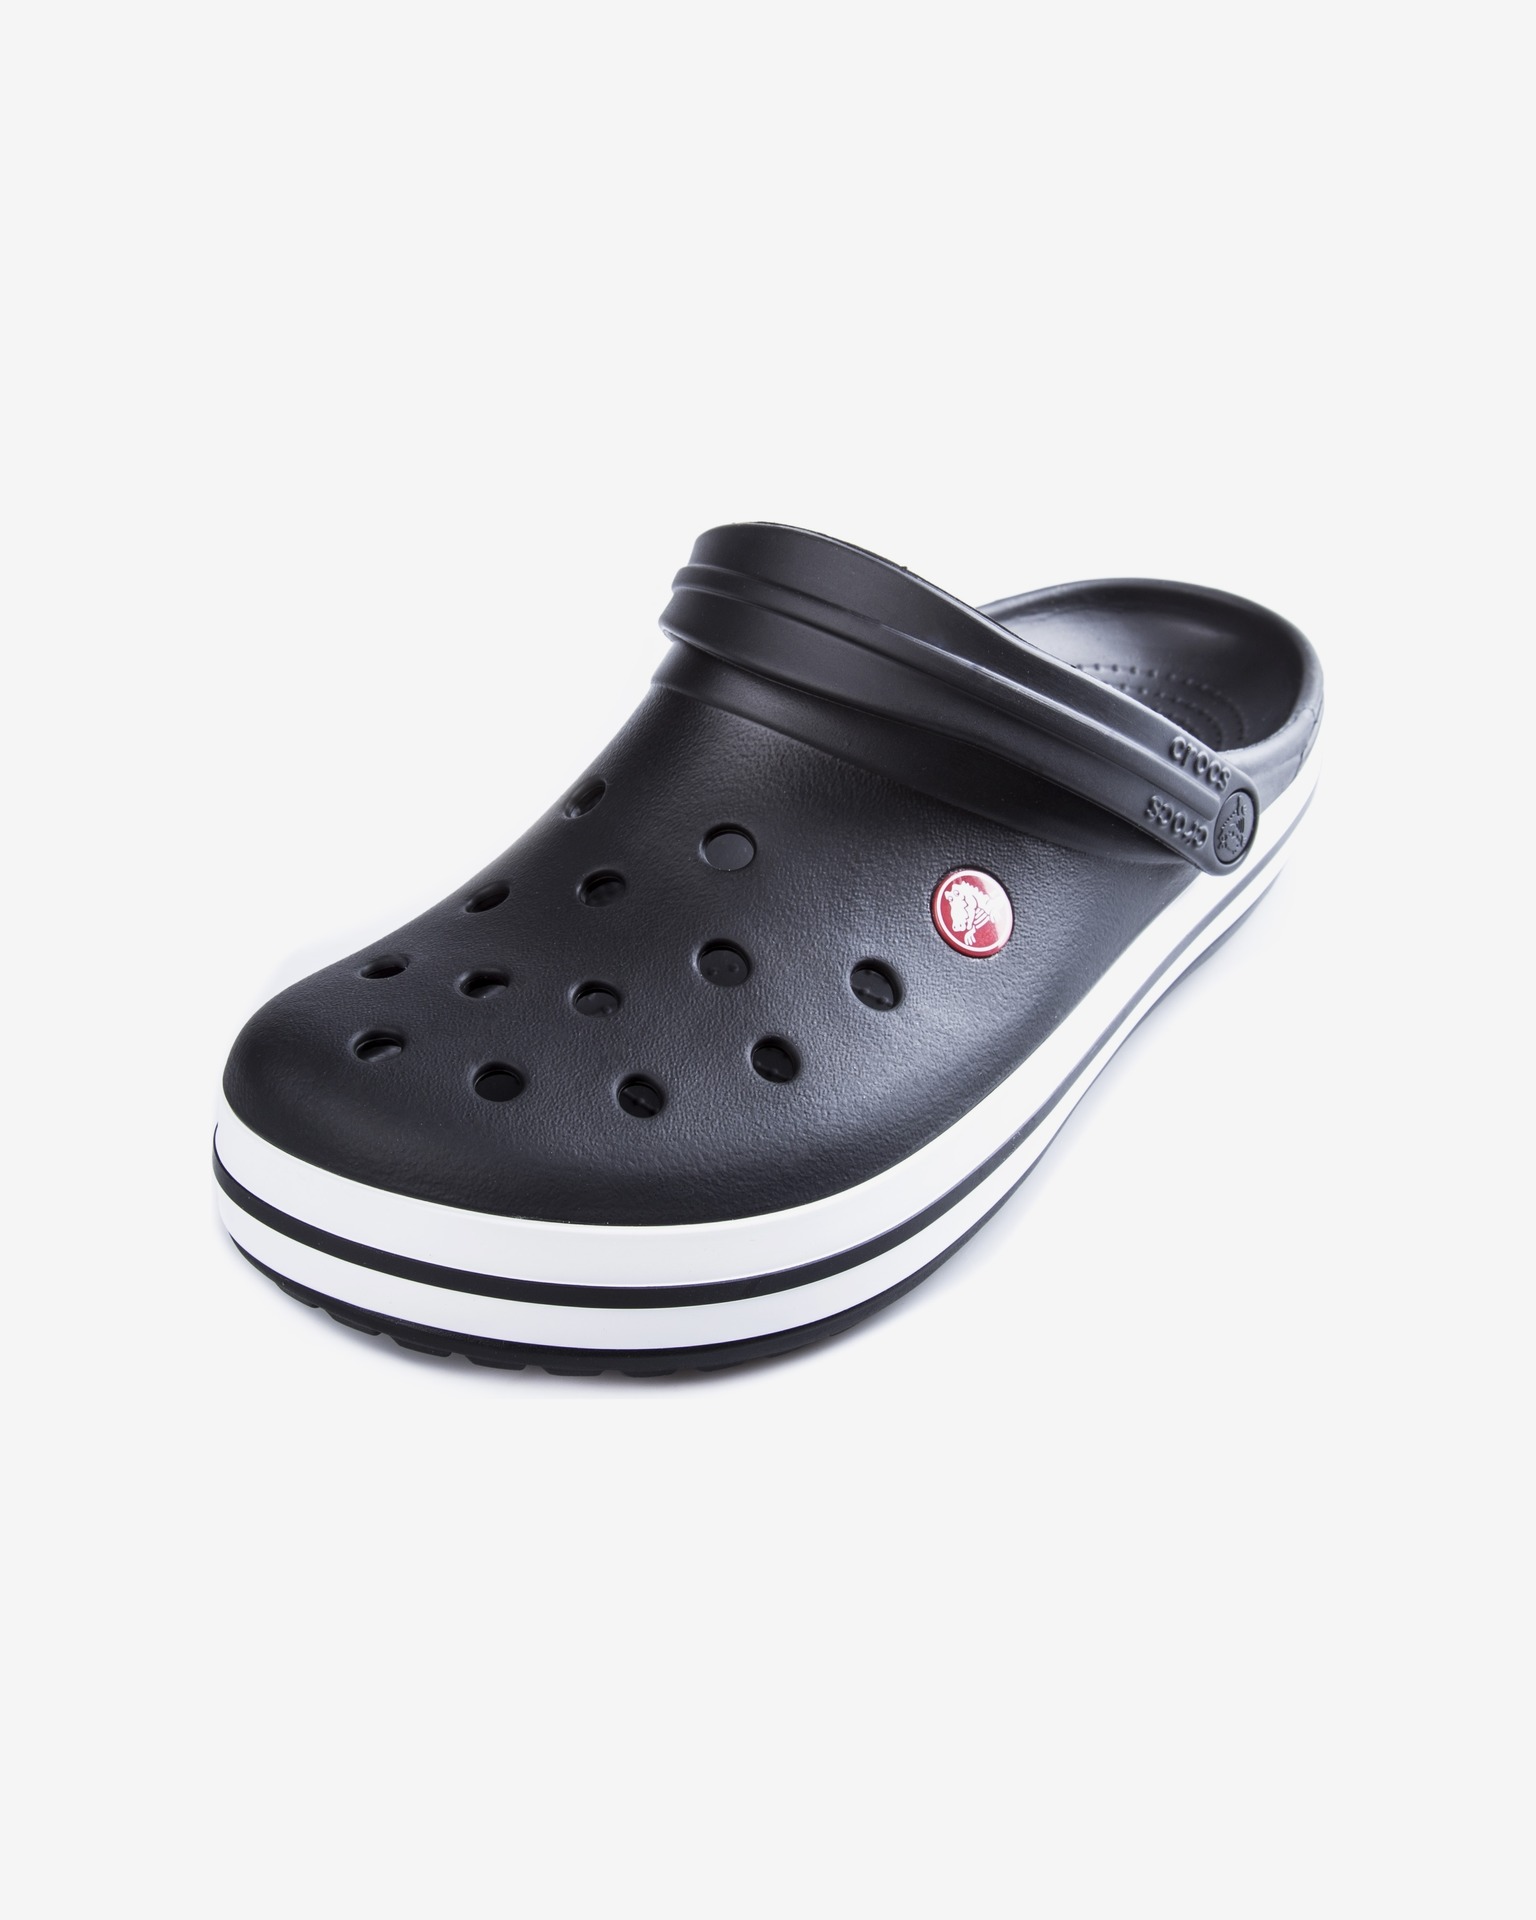 crocs new collection